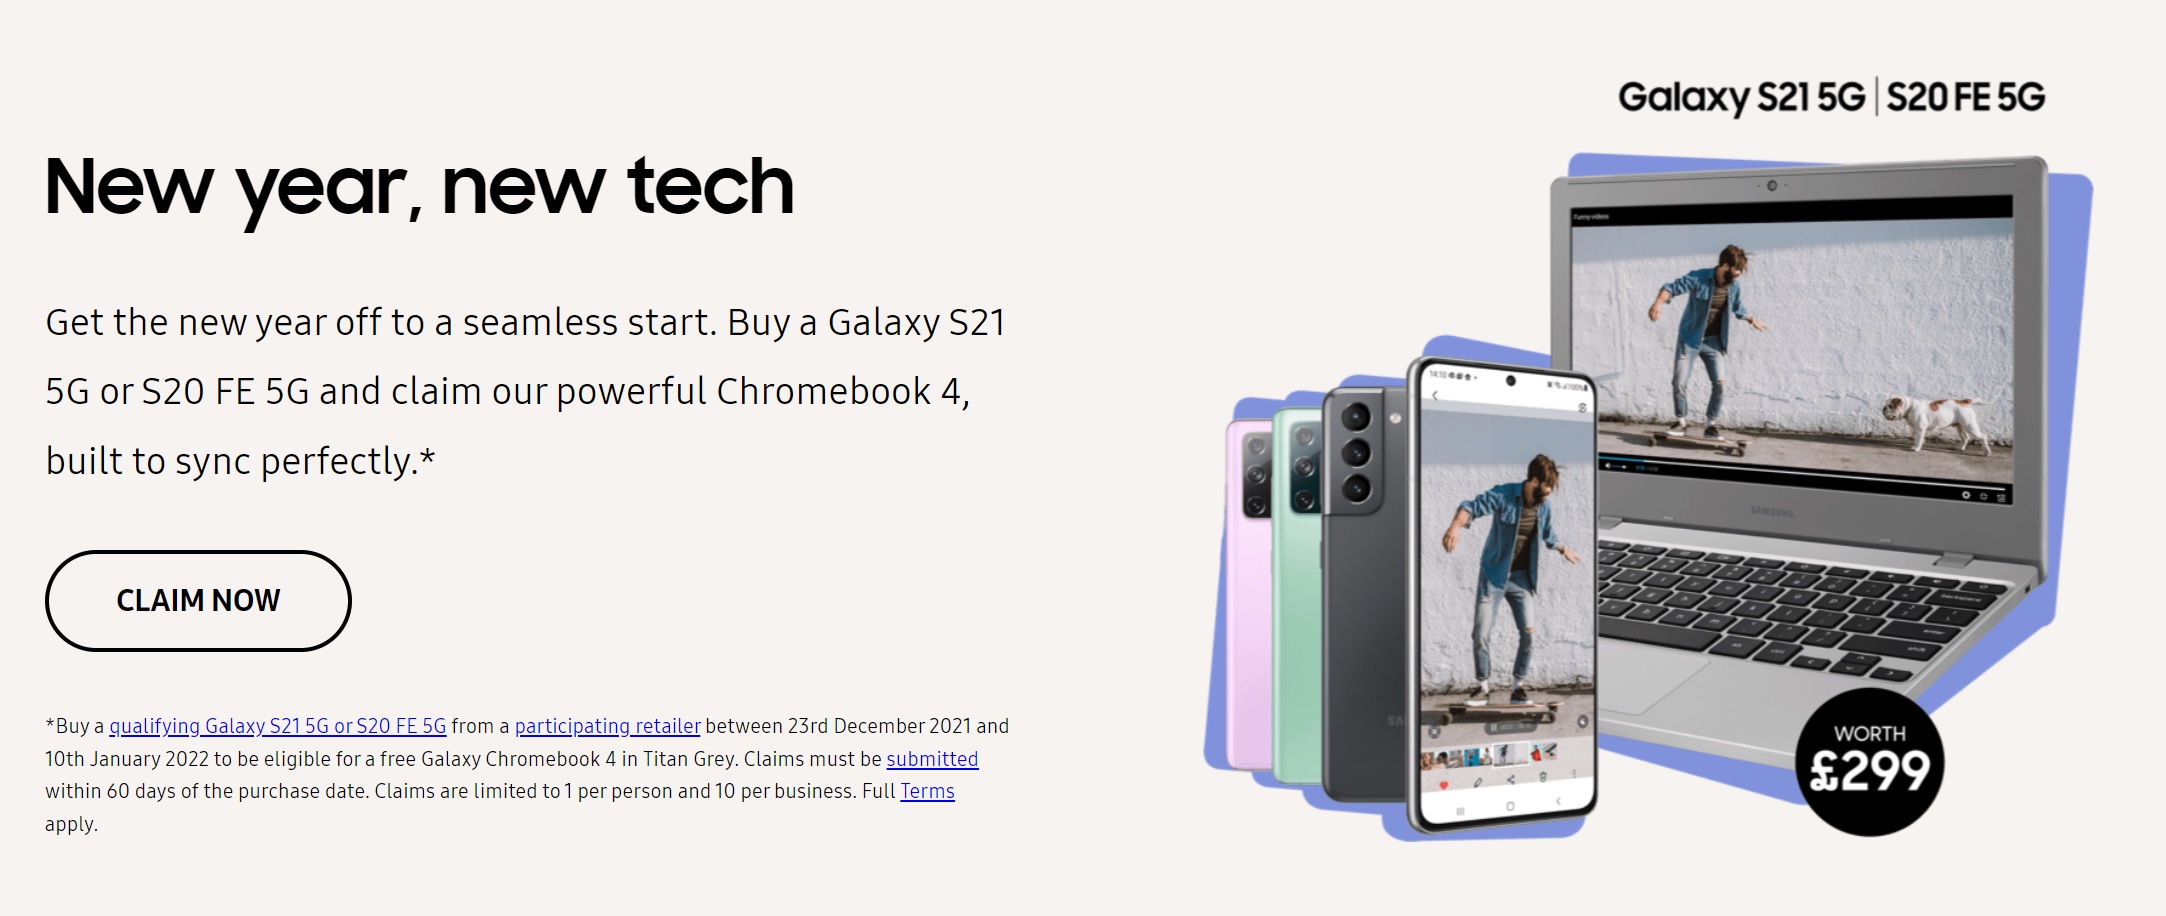 Free Samsung Chromebook 4 with Samsung Galaxy S21 5G and S20 FE 5G Deals